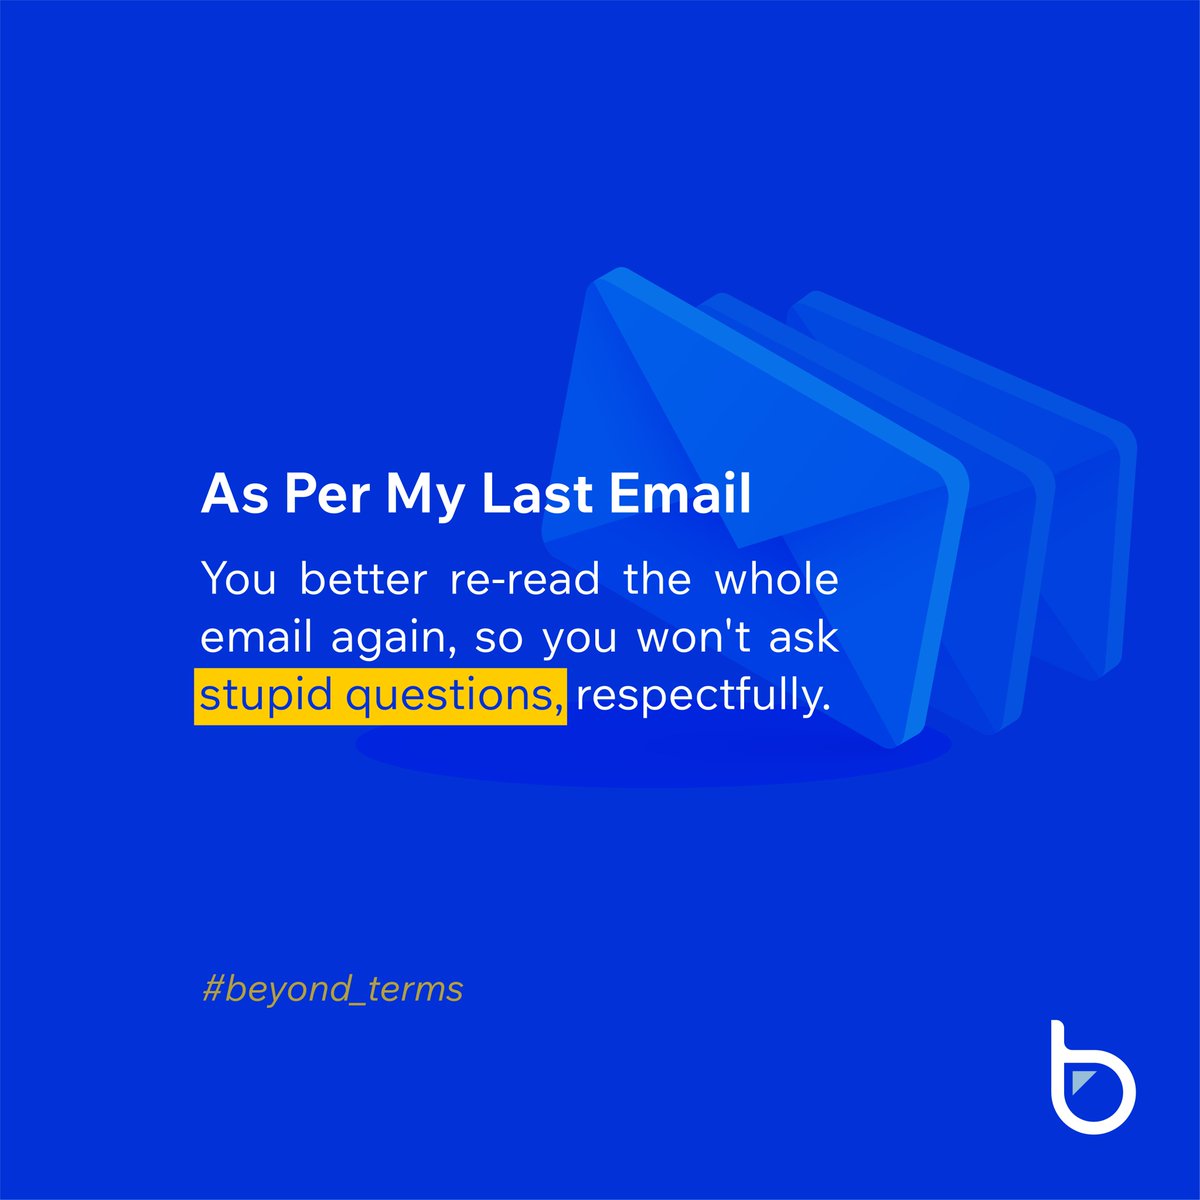 Consultant Slang Series✨
What emails really mean
#we_go_beyond #BusinessMemes